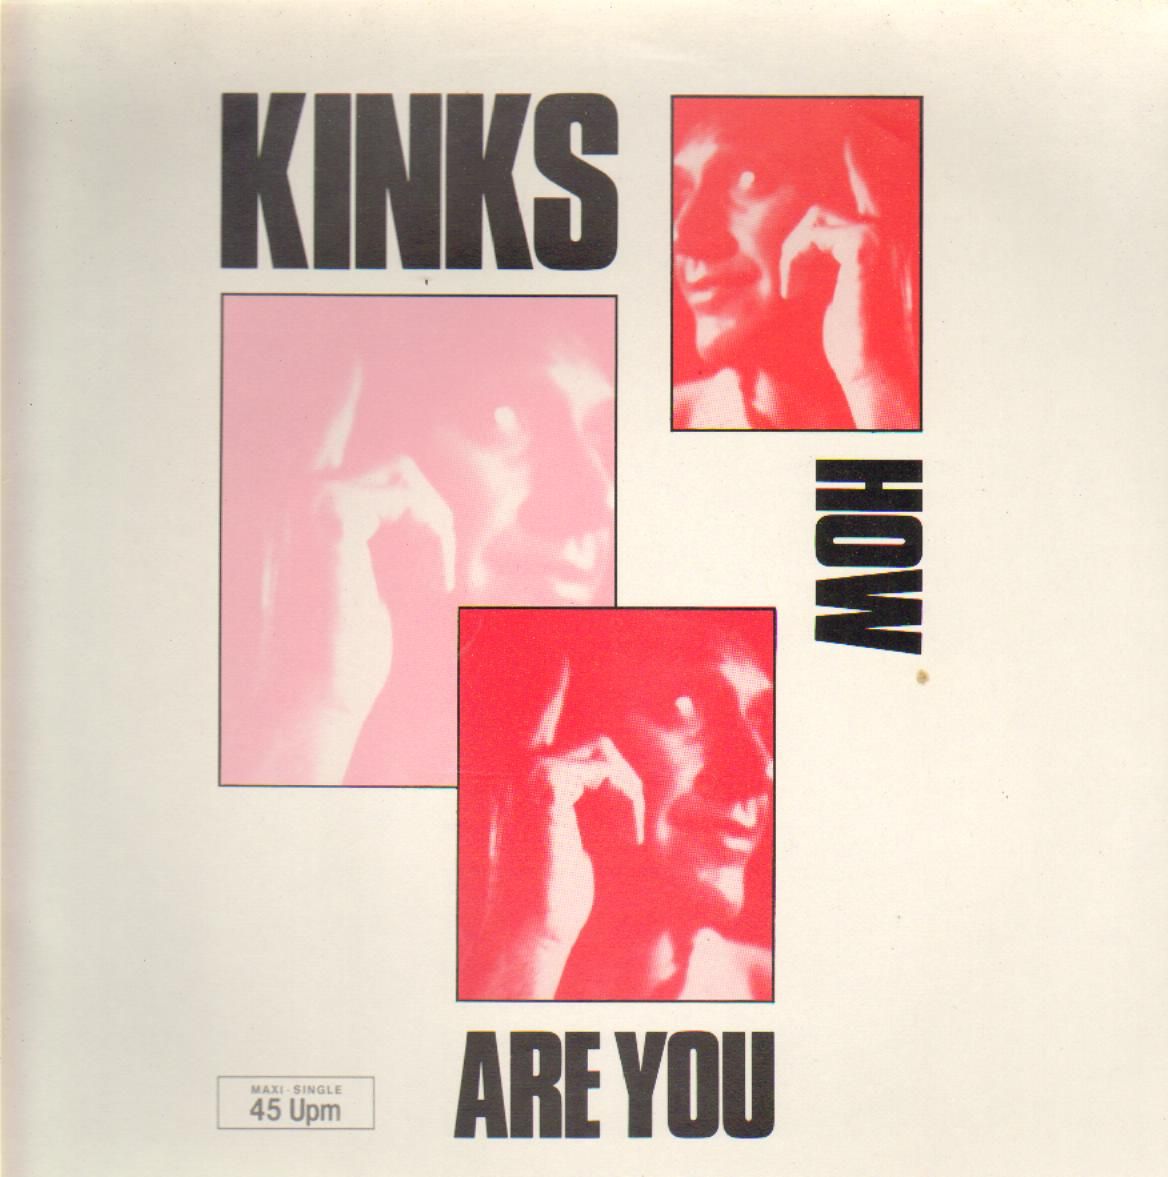 THE KINKS - How Are You cover 